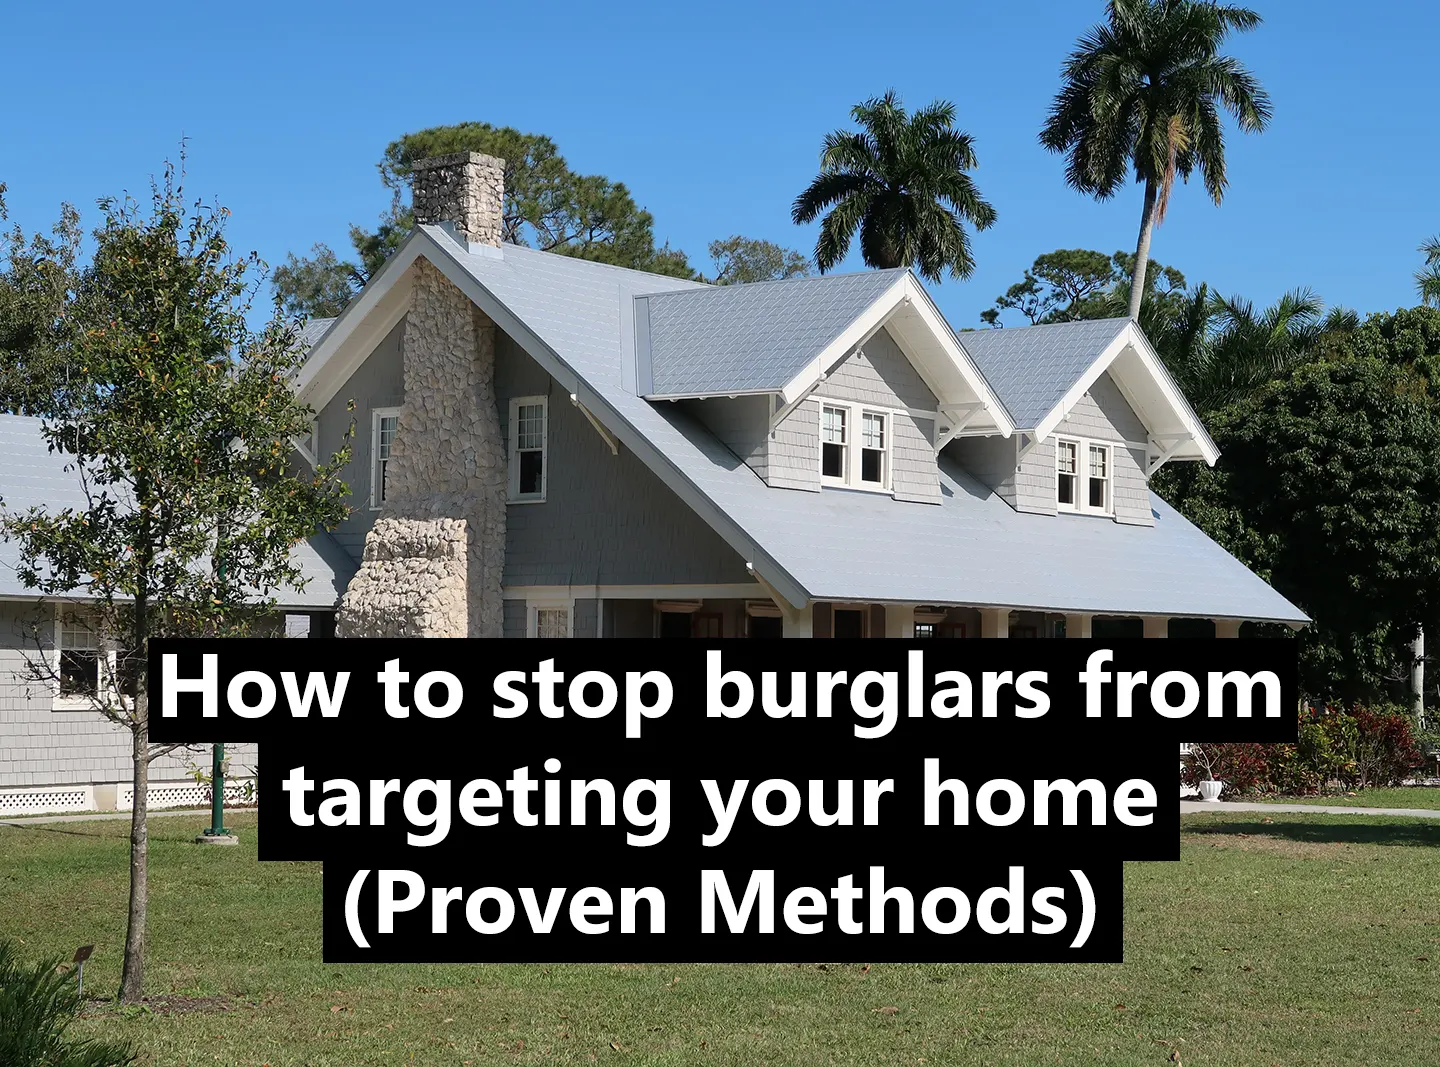 How to stop burglars from targeting your home (Proven Methods)